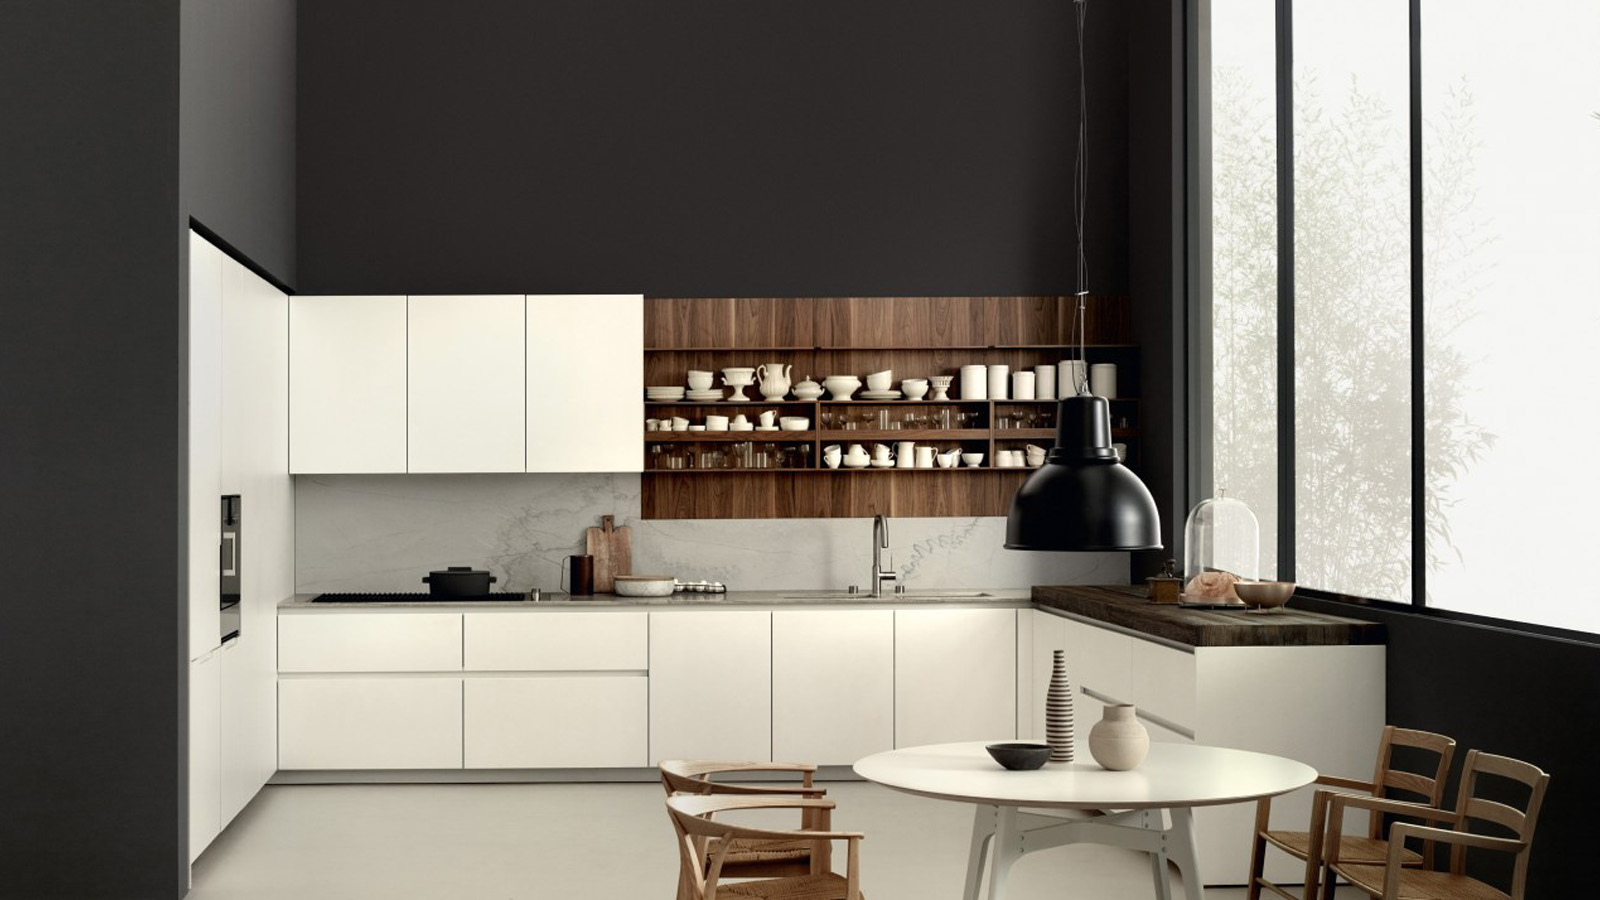 BOFFI KITCHENS AND STEEL AS A SIGN OF ELEGANCE AND DURABILITY